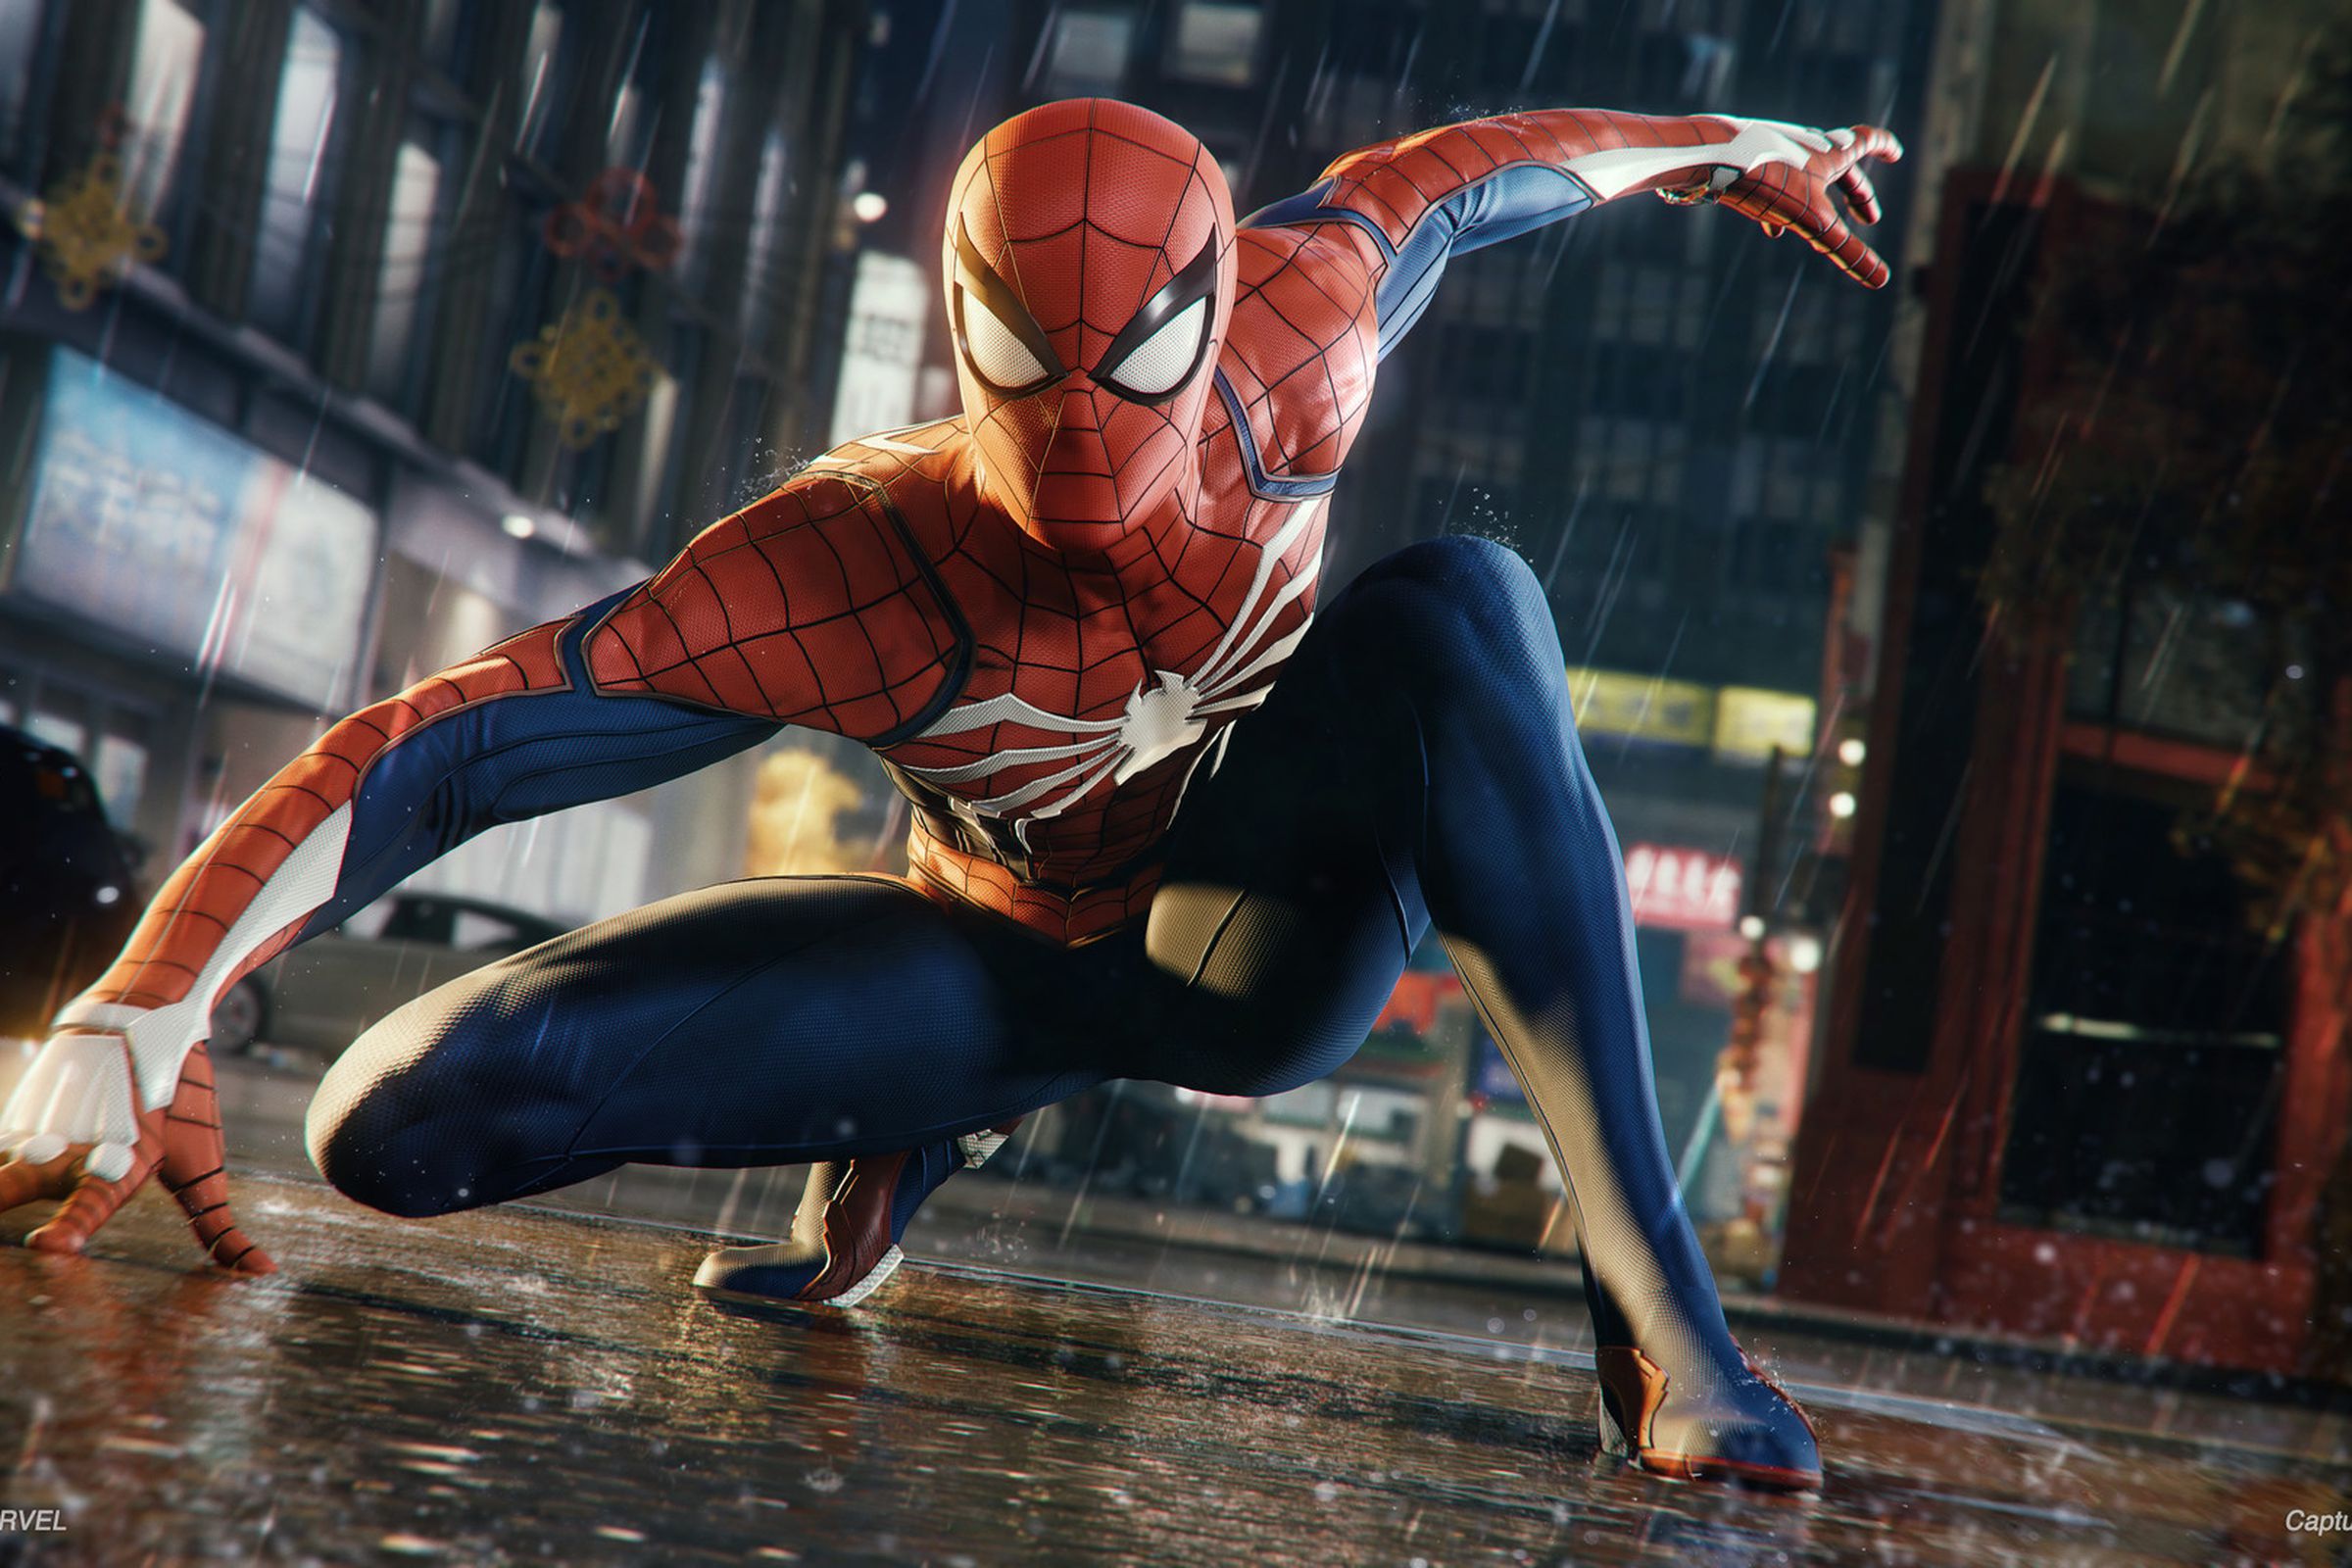 Marvel’s Spider-Man Remastered launches August 12th for PC and will be verified on Steam Deck.